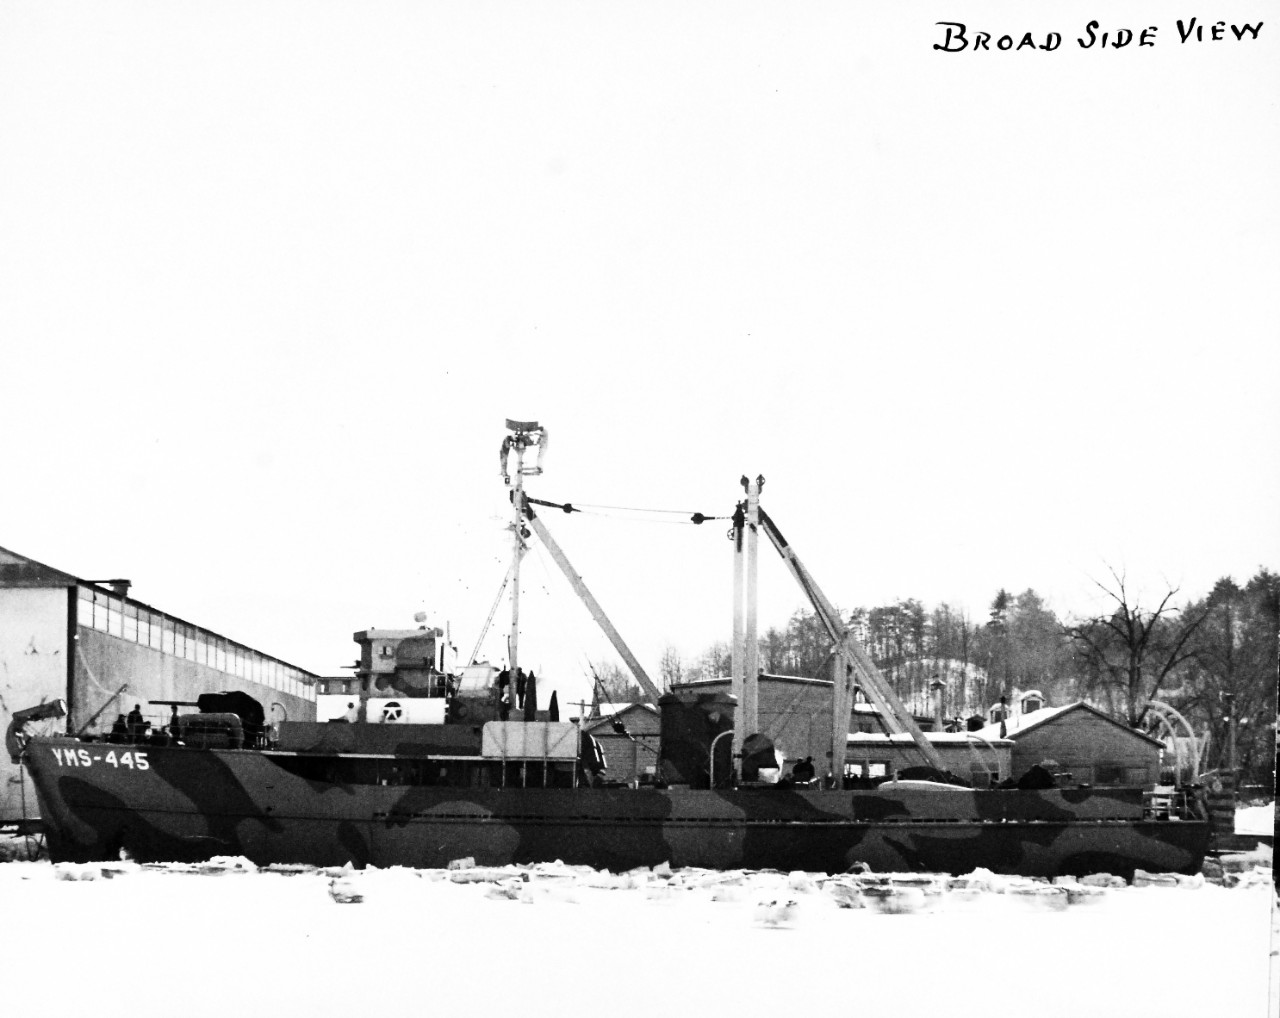 19-LCM-Box-574-YMS-445-1:  YMS-445, 1944.   Broadside view, at C. Hiltebrant Drydock Co, Kingston, New York, 1944.  Official Bureau of Ships Photograph, now in the collections of the National Archives.  (2017/10/18).   